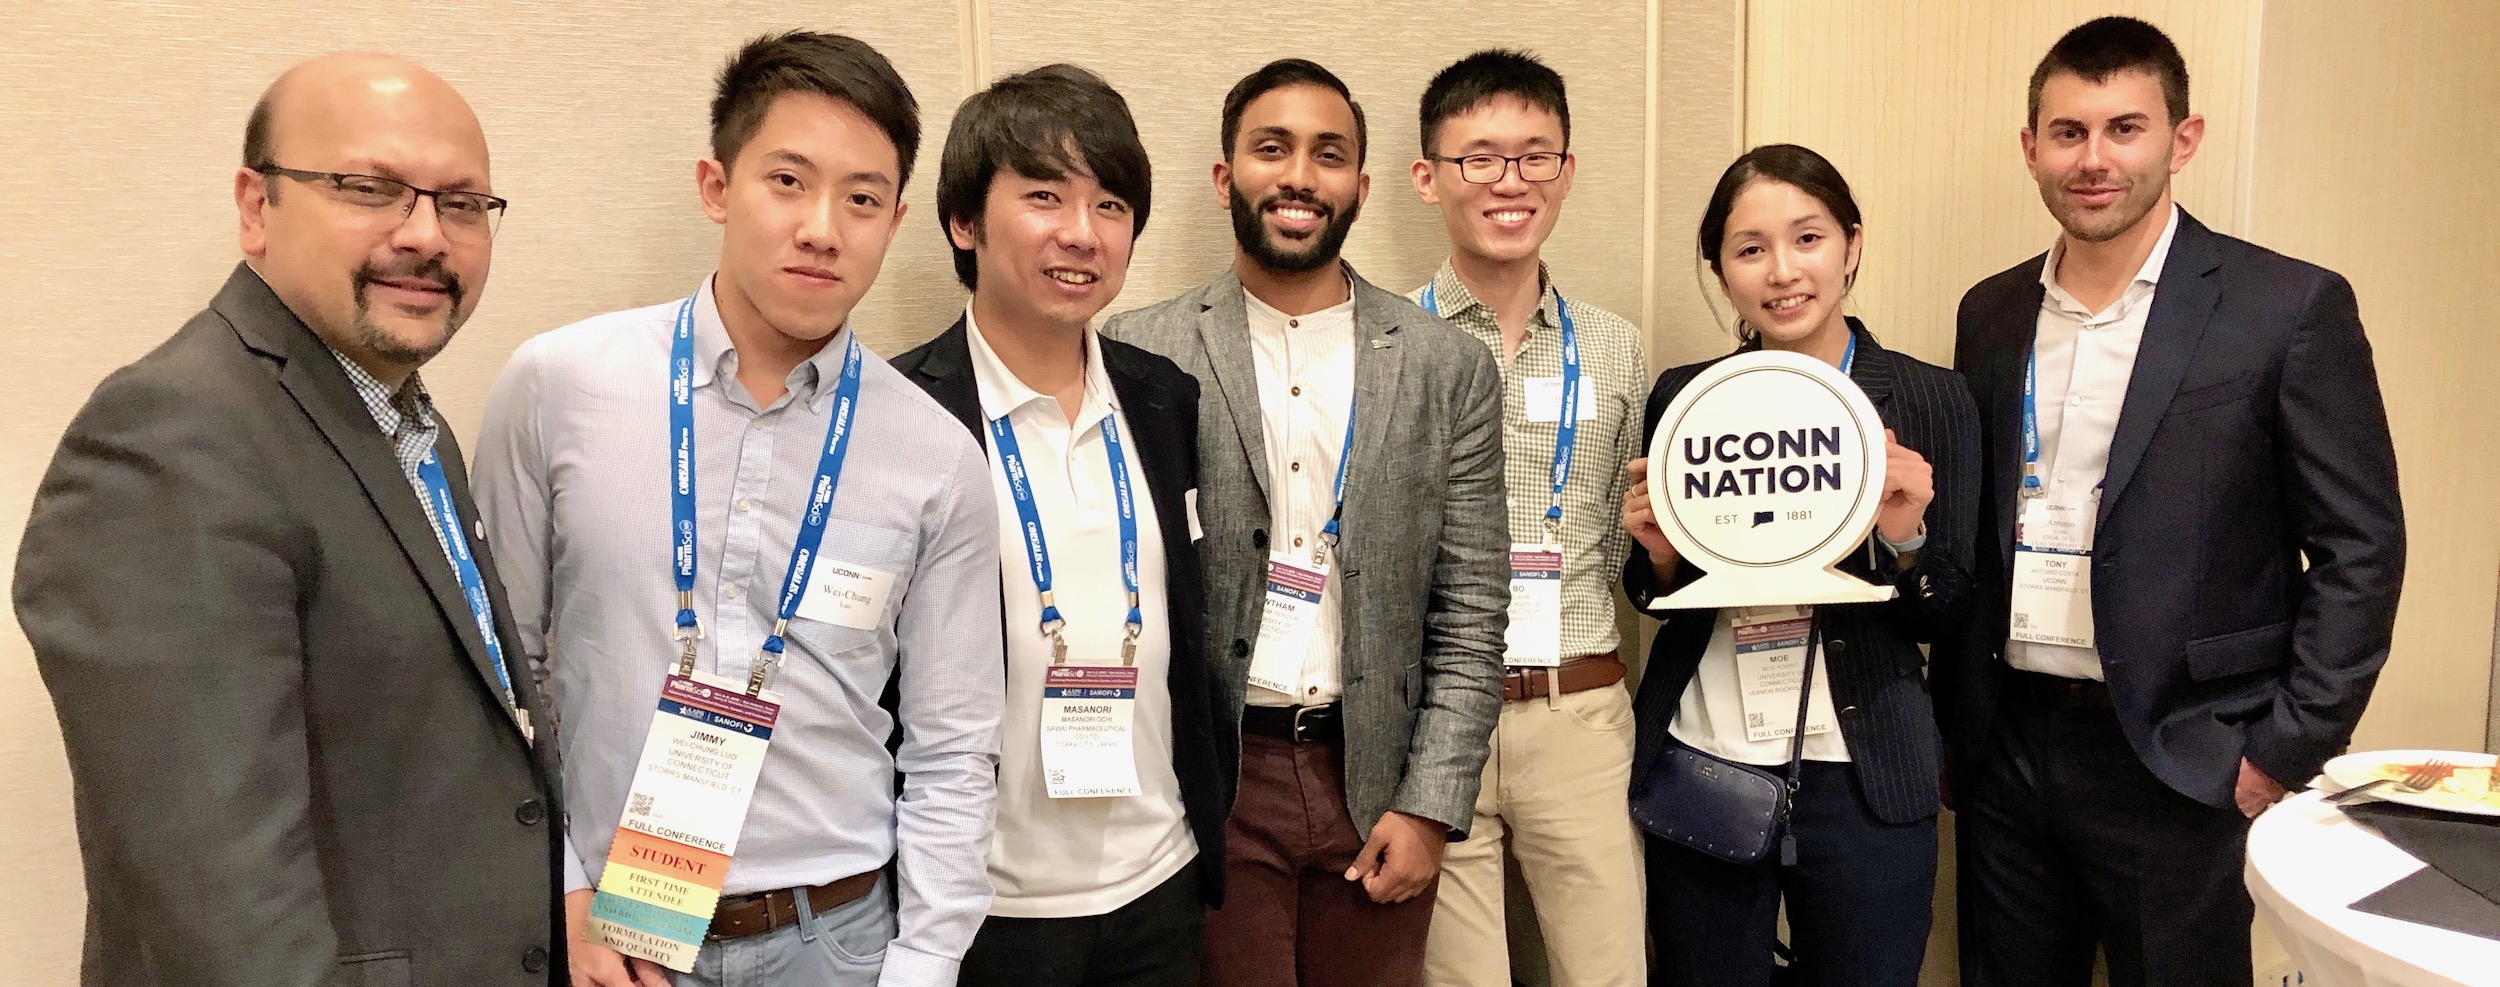 Pharmaceutical Sciences graduate students at AAPS 2019 conference